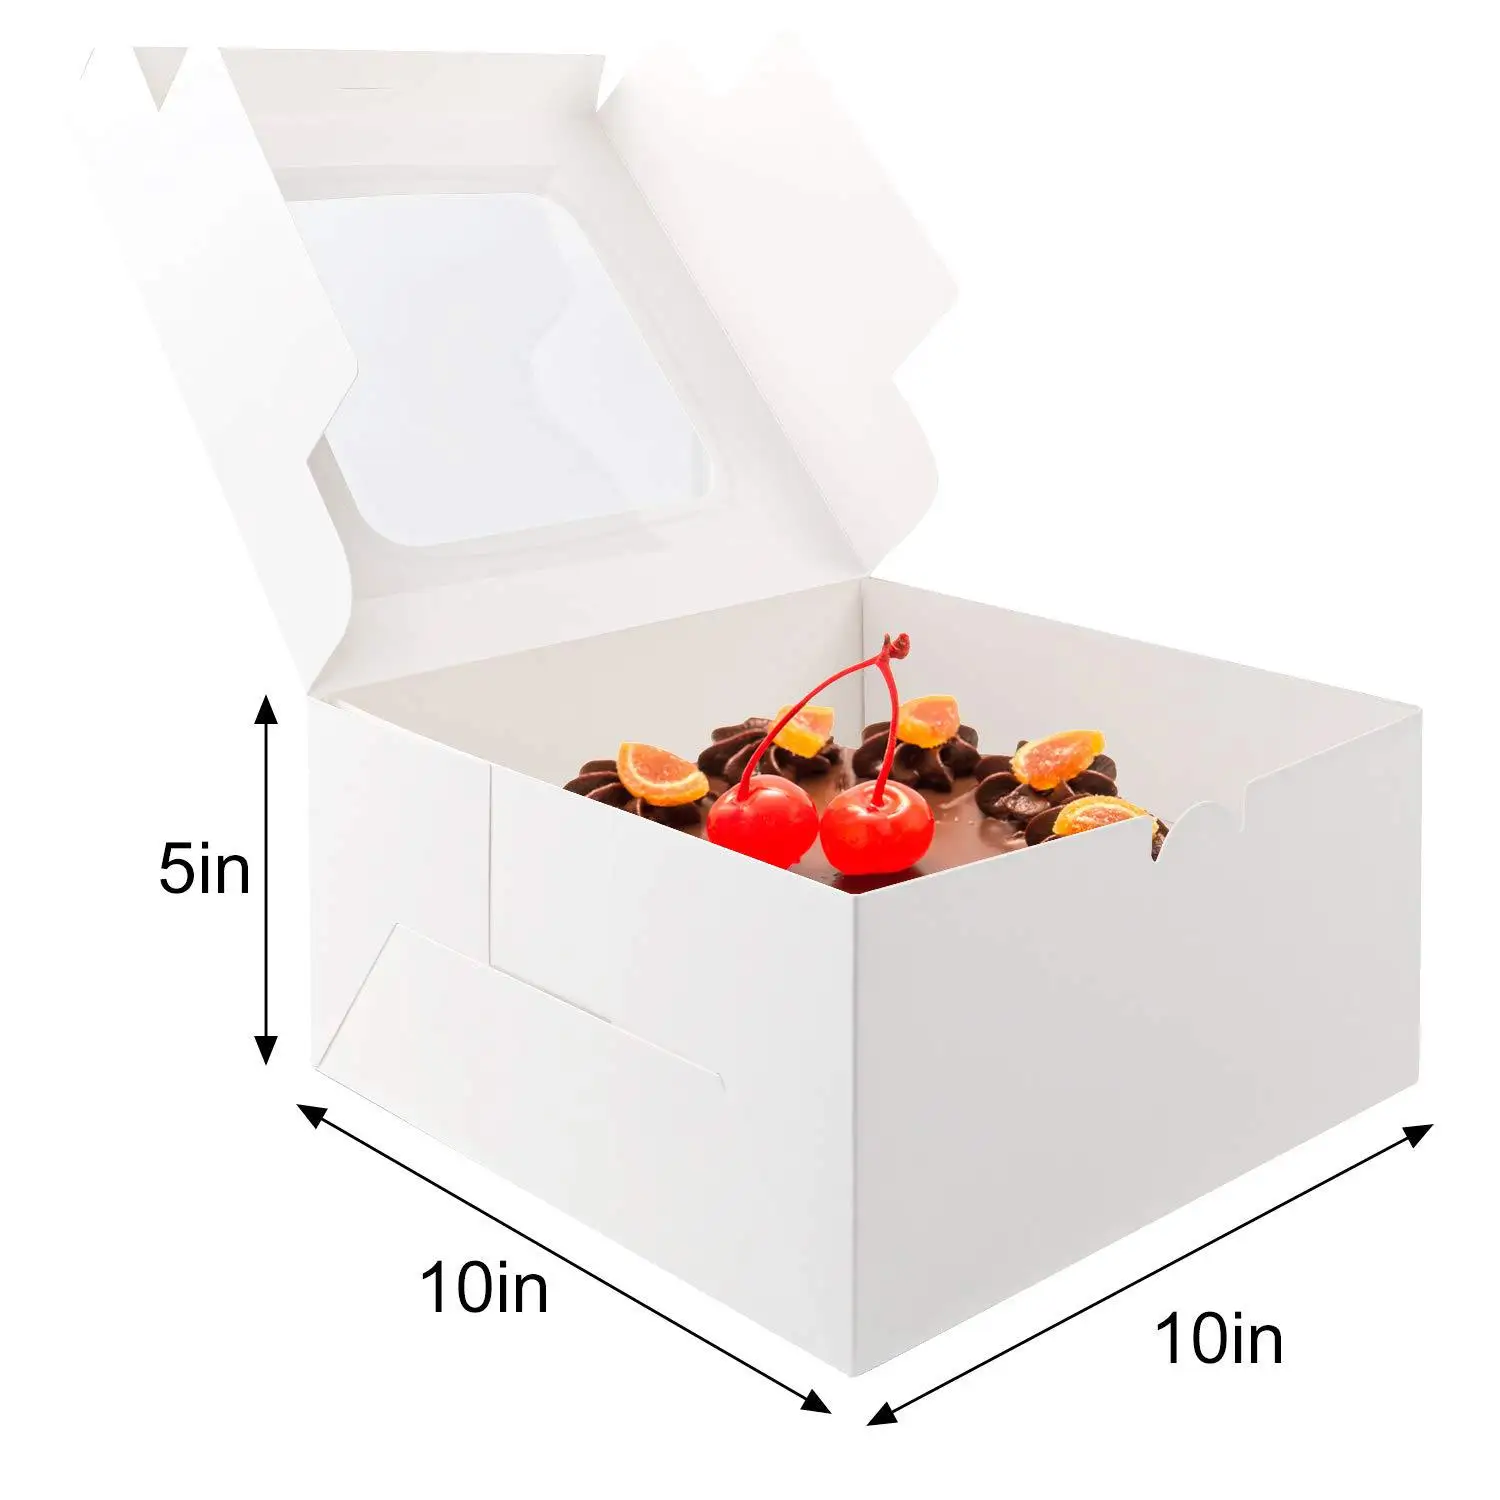 Hot sale Gift Box With Window Dessert Pastry Candy Packaging Box Wedding Party Birthday Baby Shower Cake box